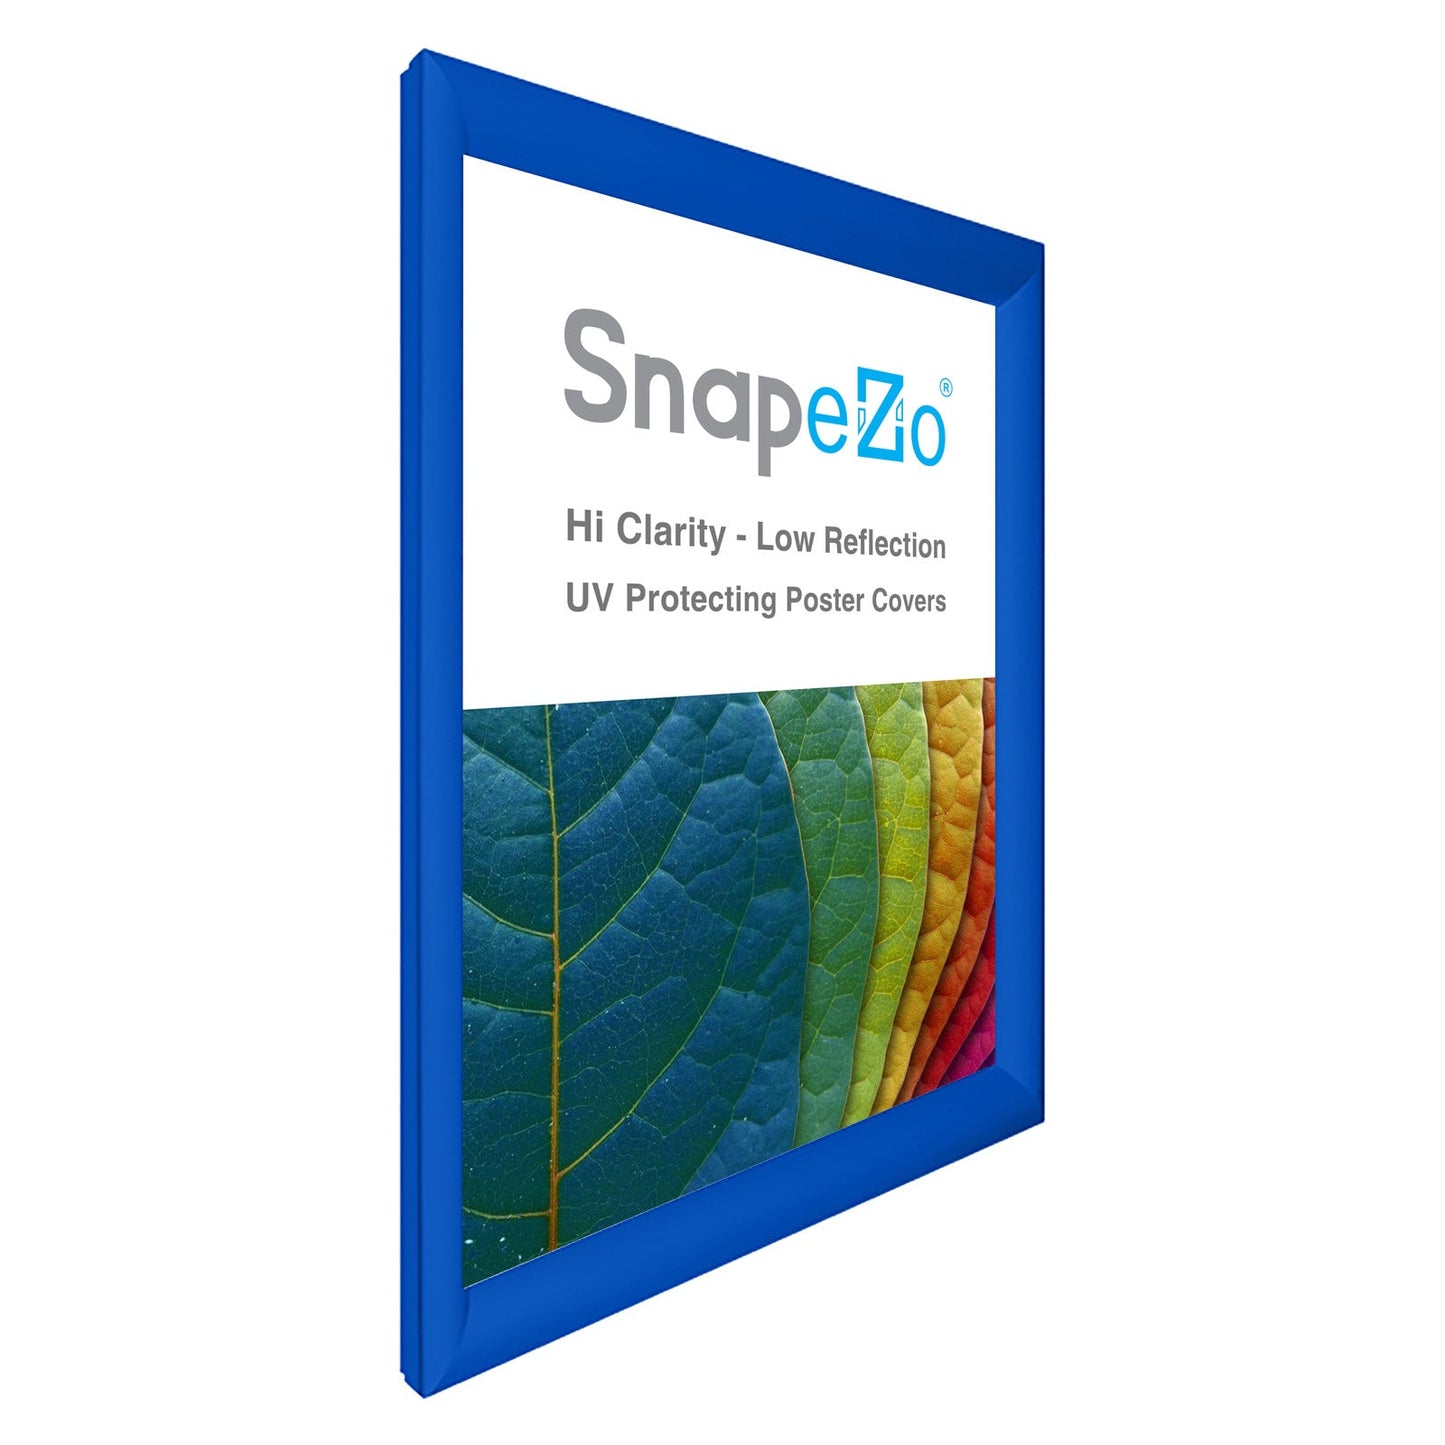 Load image into Gallery viewer, 27x39 Blue SnapeZo® Snap Frame - 1.2&amp;quot; Profile
